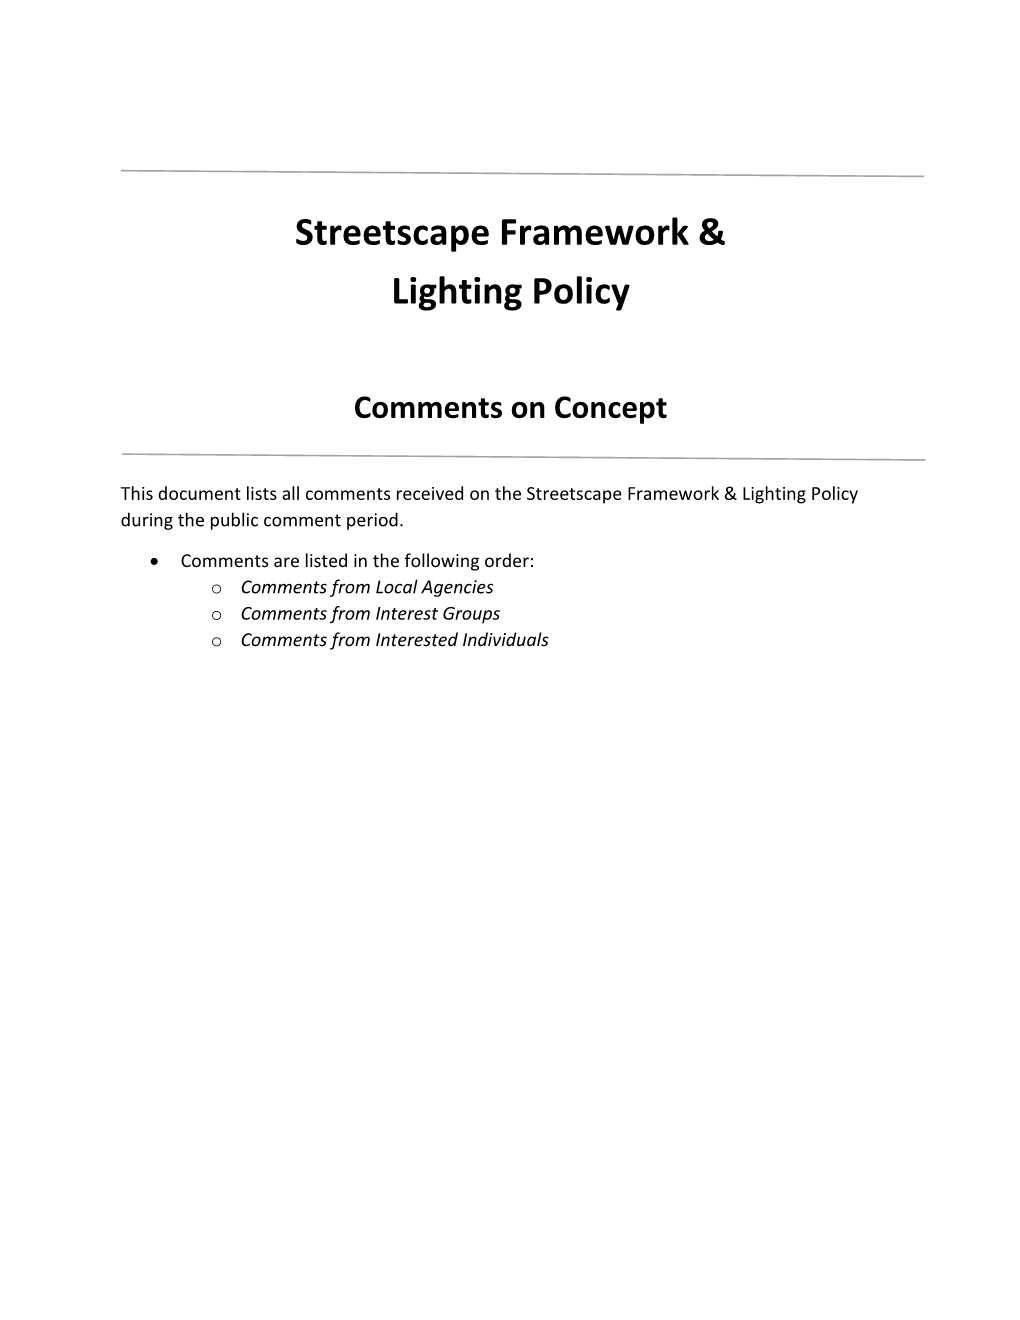 Streetscape Framework & Lighting Policy Public Comments